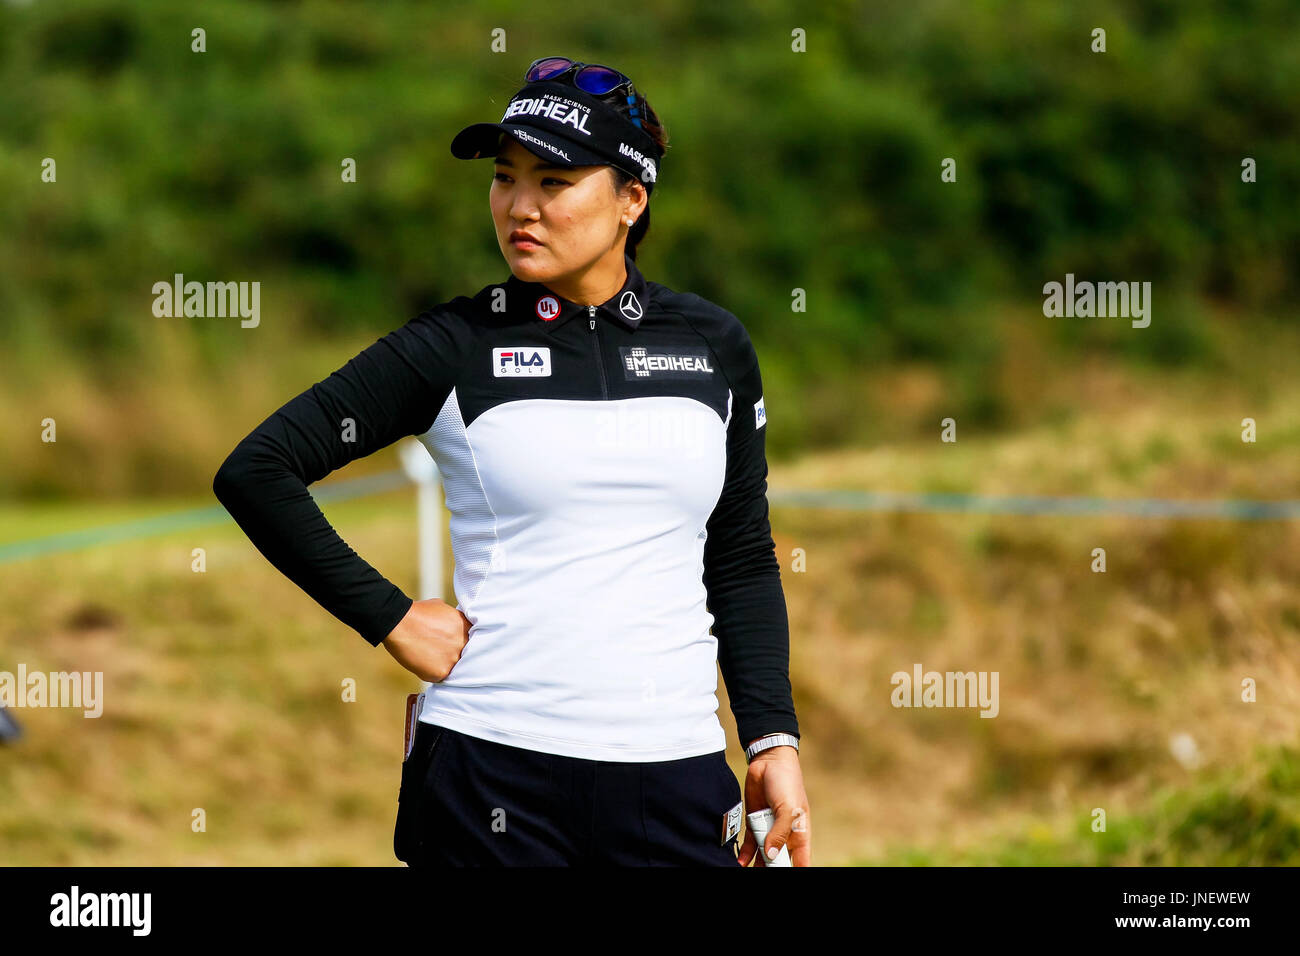 Irvine, Scotland, UK. 30th July, 2017. For the 4th day of the Aberdeen Asset Management Open Golf Championship, the competition was marked by strong gusty wind conditions. Credit: Findlay/Alamy Live News Stock Photo